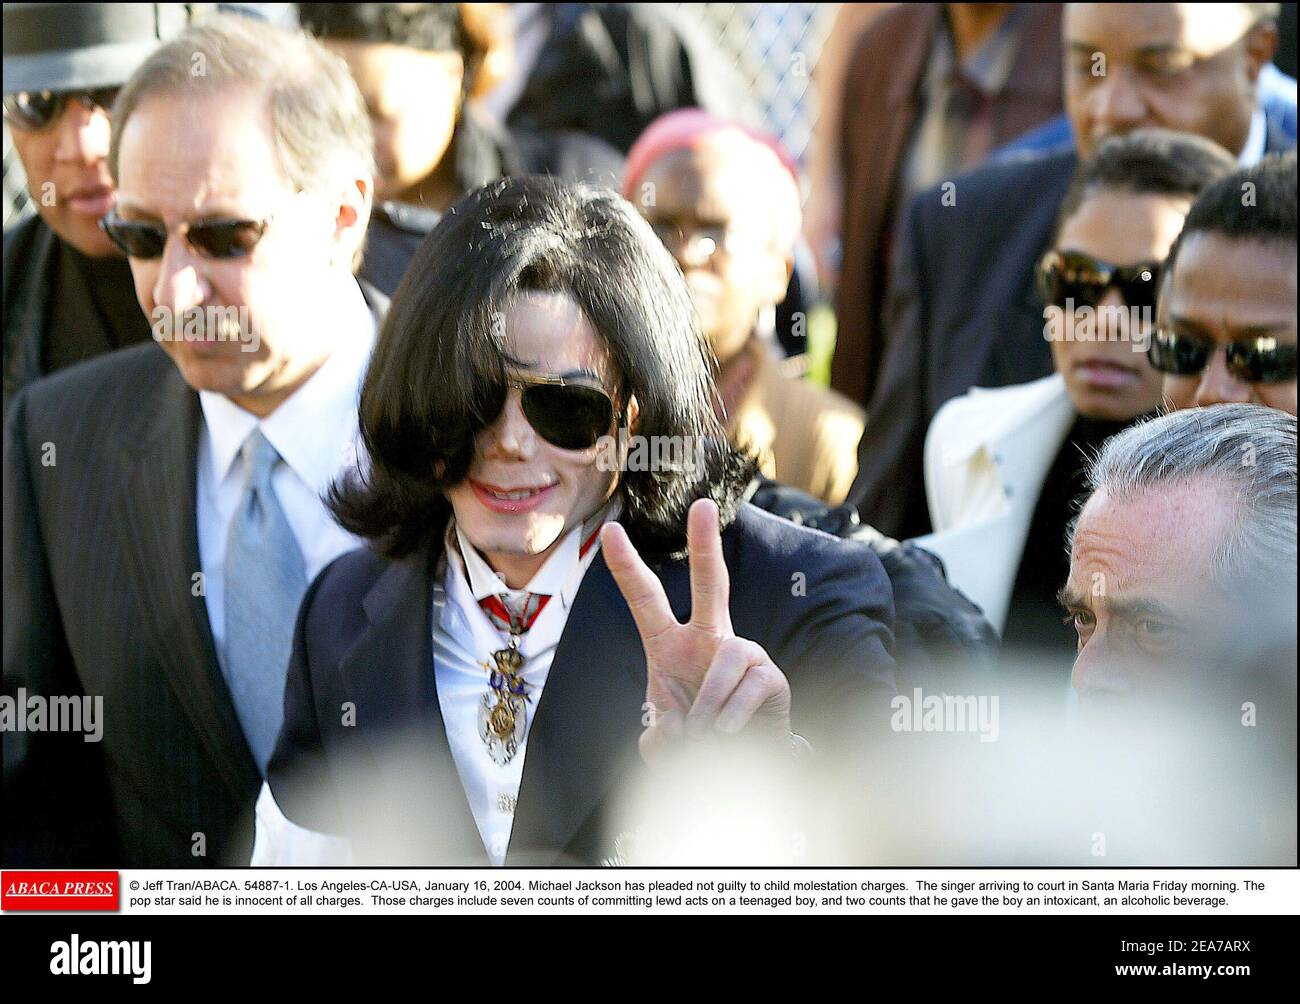 © Jeff Tran/ABACA. 54887-1. Los Angeles-CA-USA, January 16, 2004. Michael Jackson has pleaded not guilty to child molestation charges. The singer arriving to court in Santa Maria Friday morning. The pop star said he is innocent of all charges. Those charges include seven counts of committing lewd acts on a teenaged boy, and two counts that he gave the boy an intoxicant, an alcoholic beverage. Stock Photo